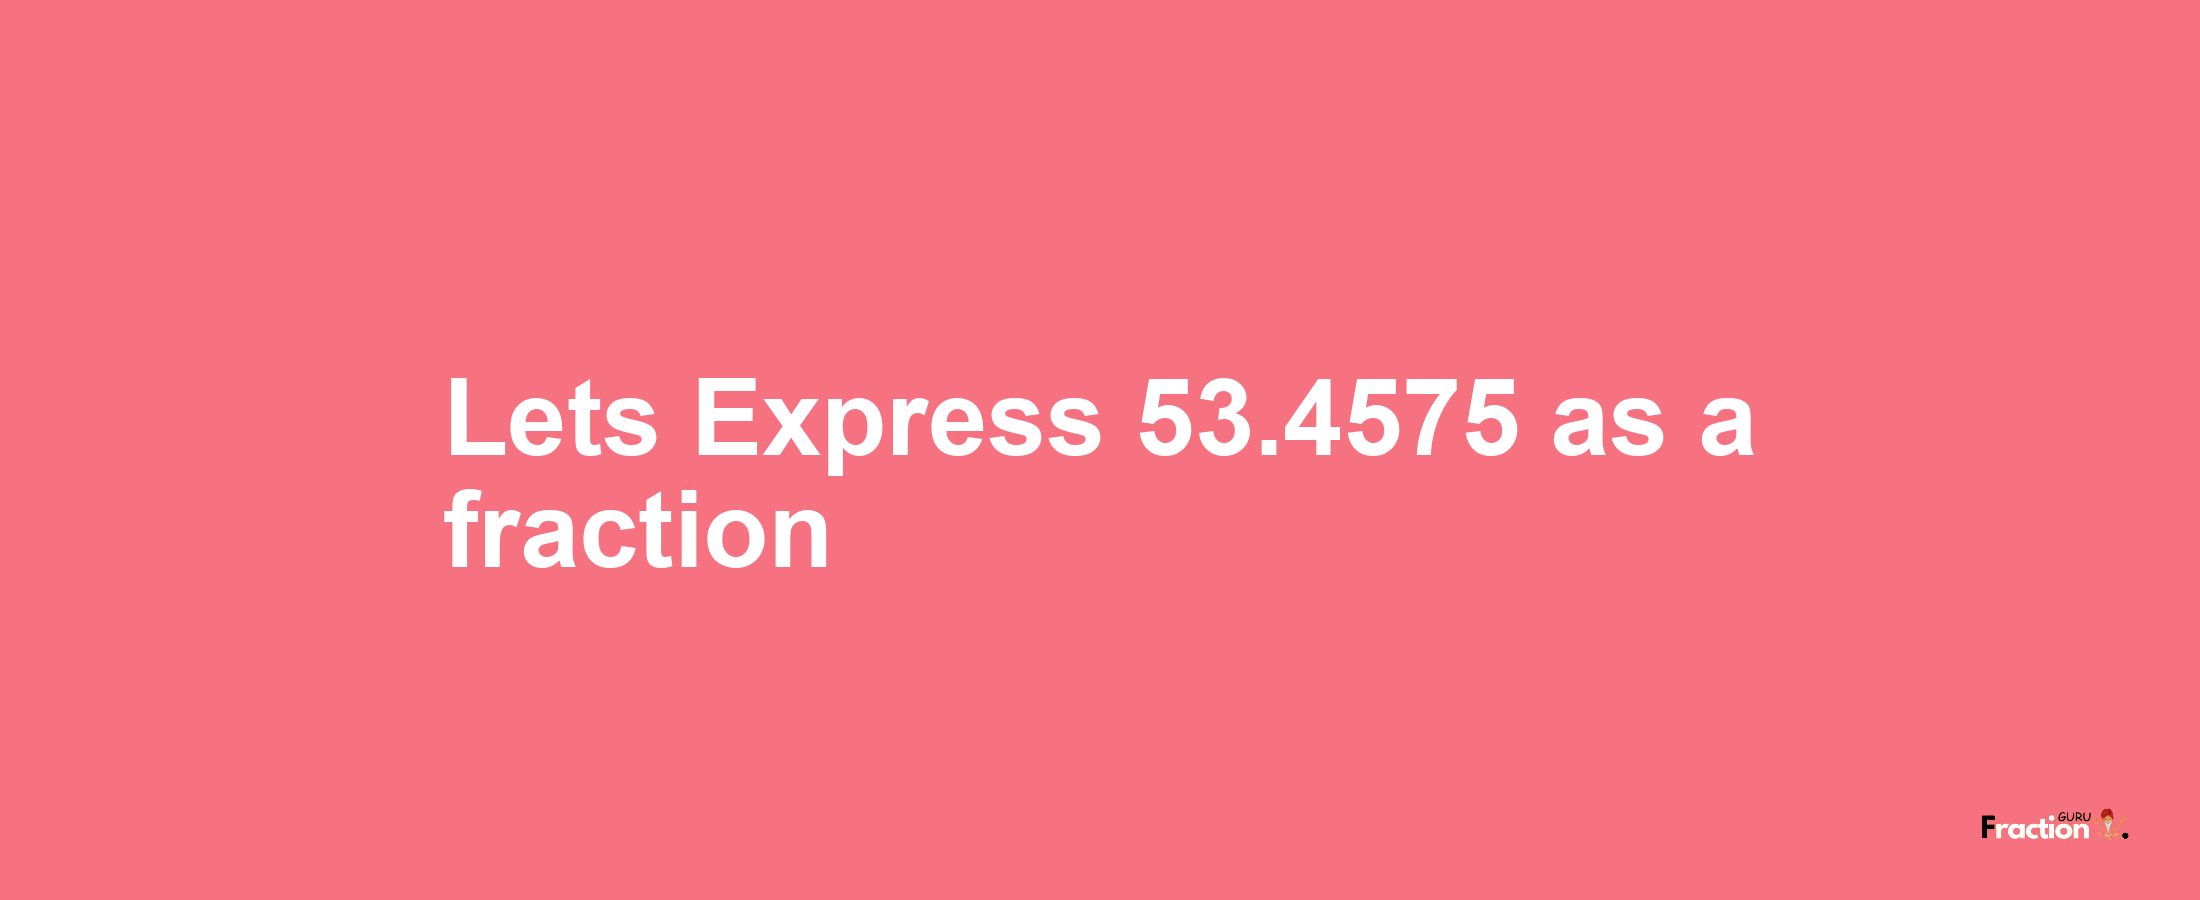 Lets Express 53.4575 as afraction